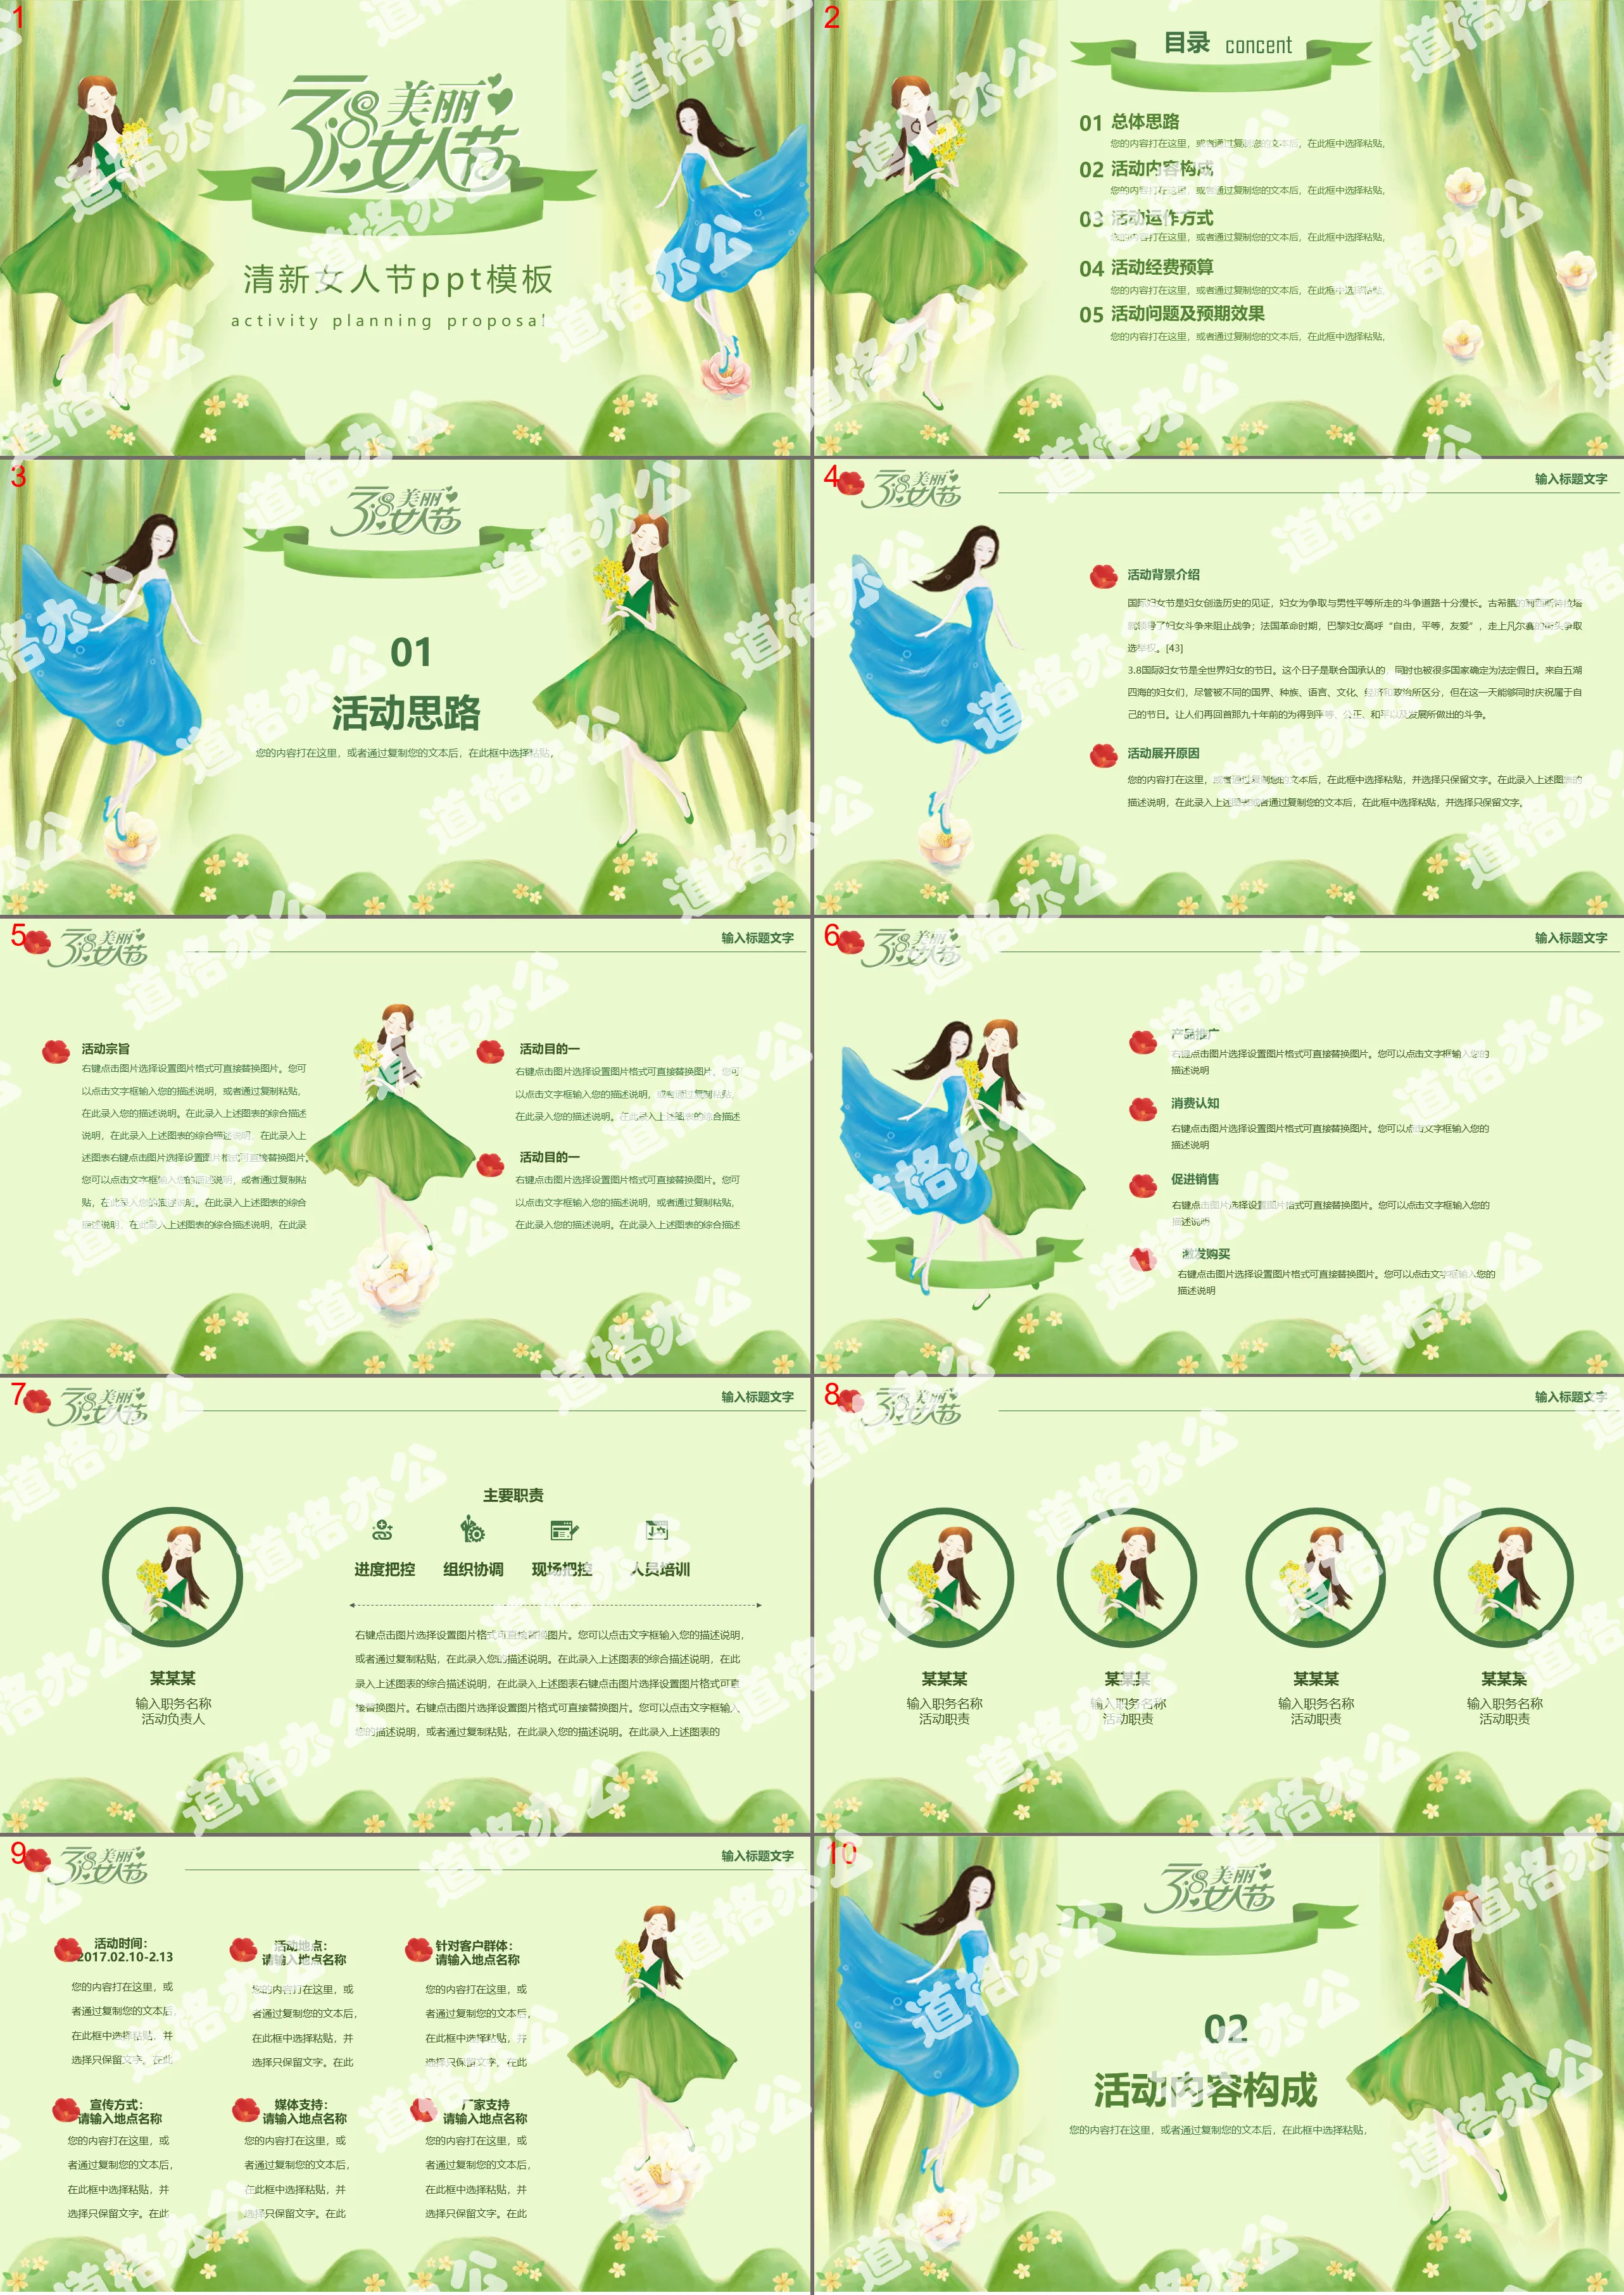 Green and fresh 38 Women's Day event planning PPT template